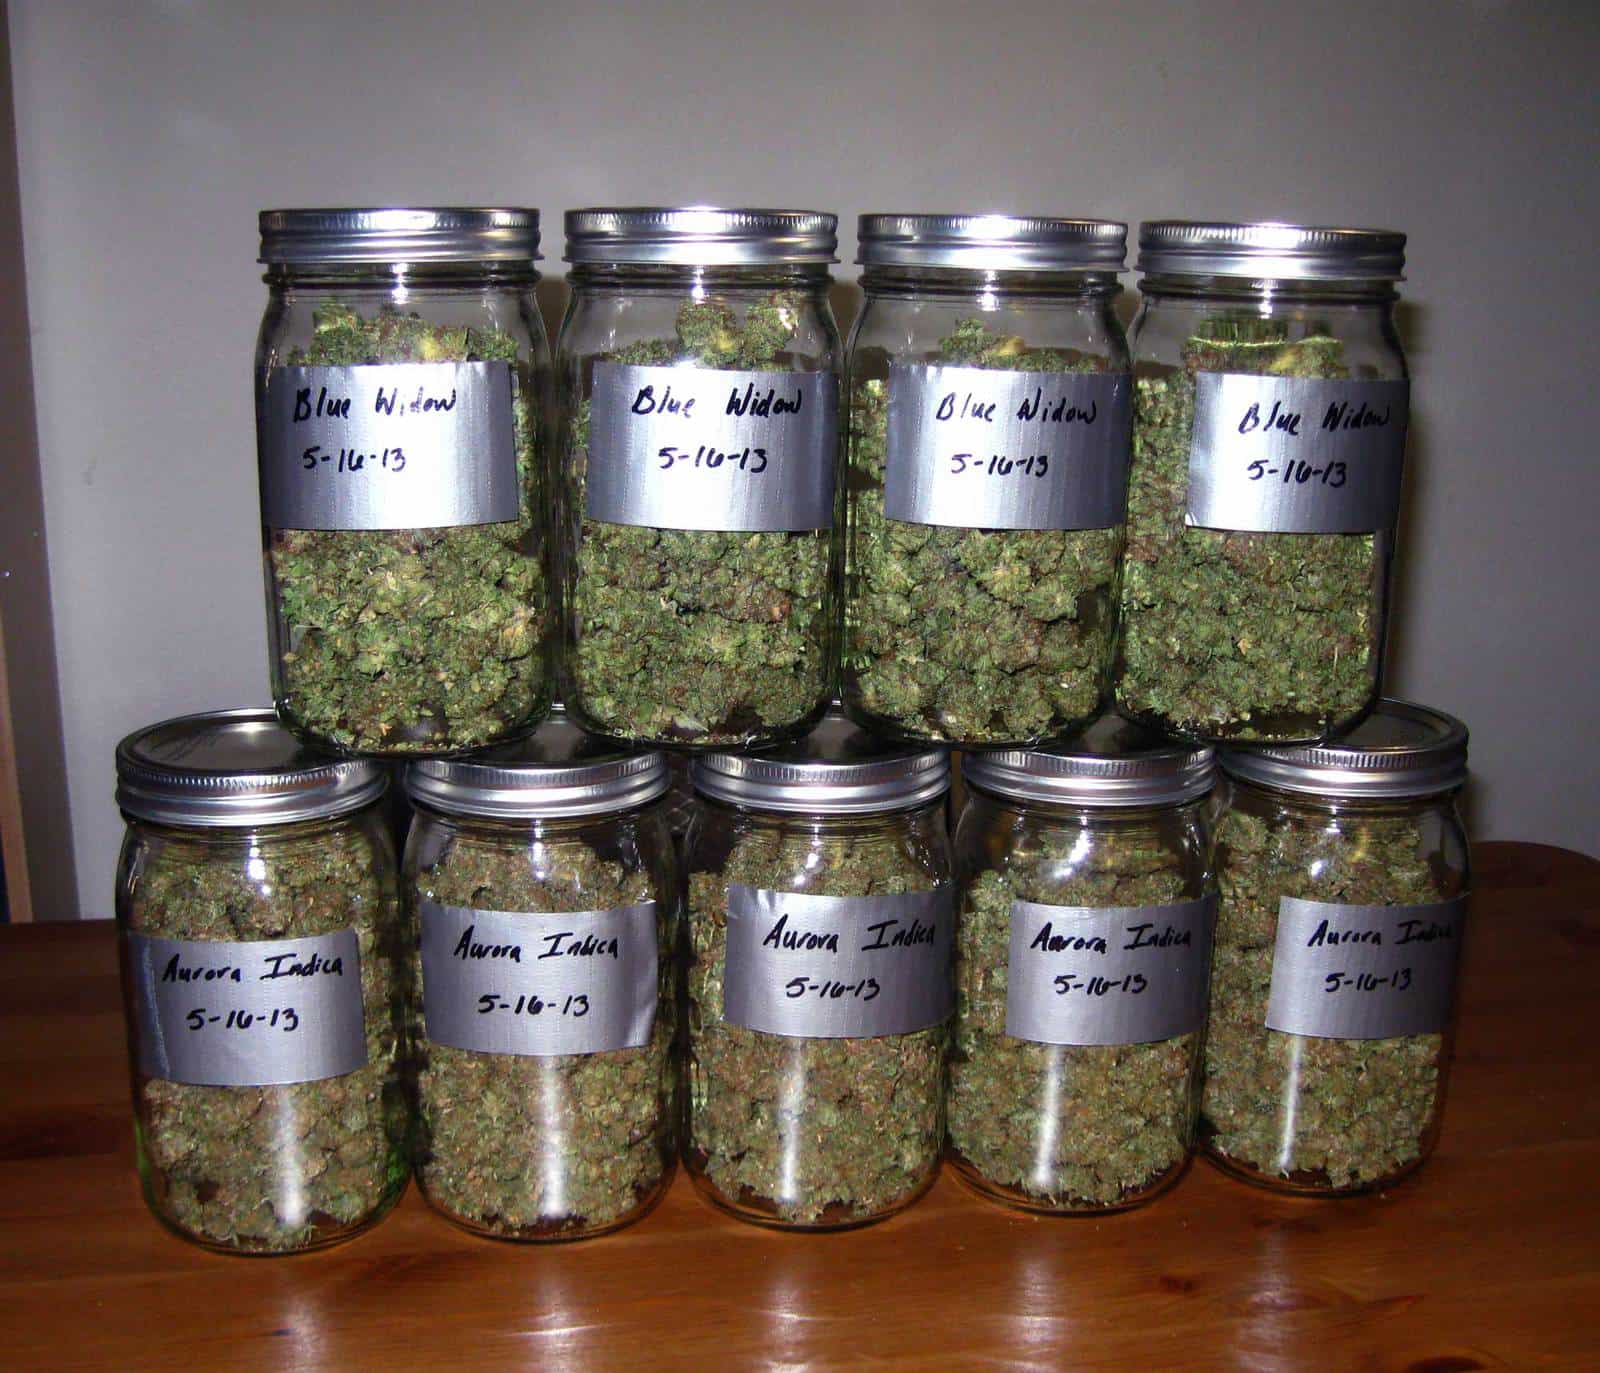 Growing Weed for Dummies: 10 Simple Steps to Get You Started 11